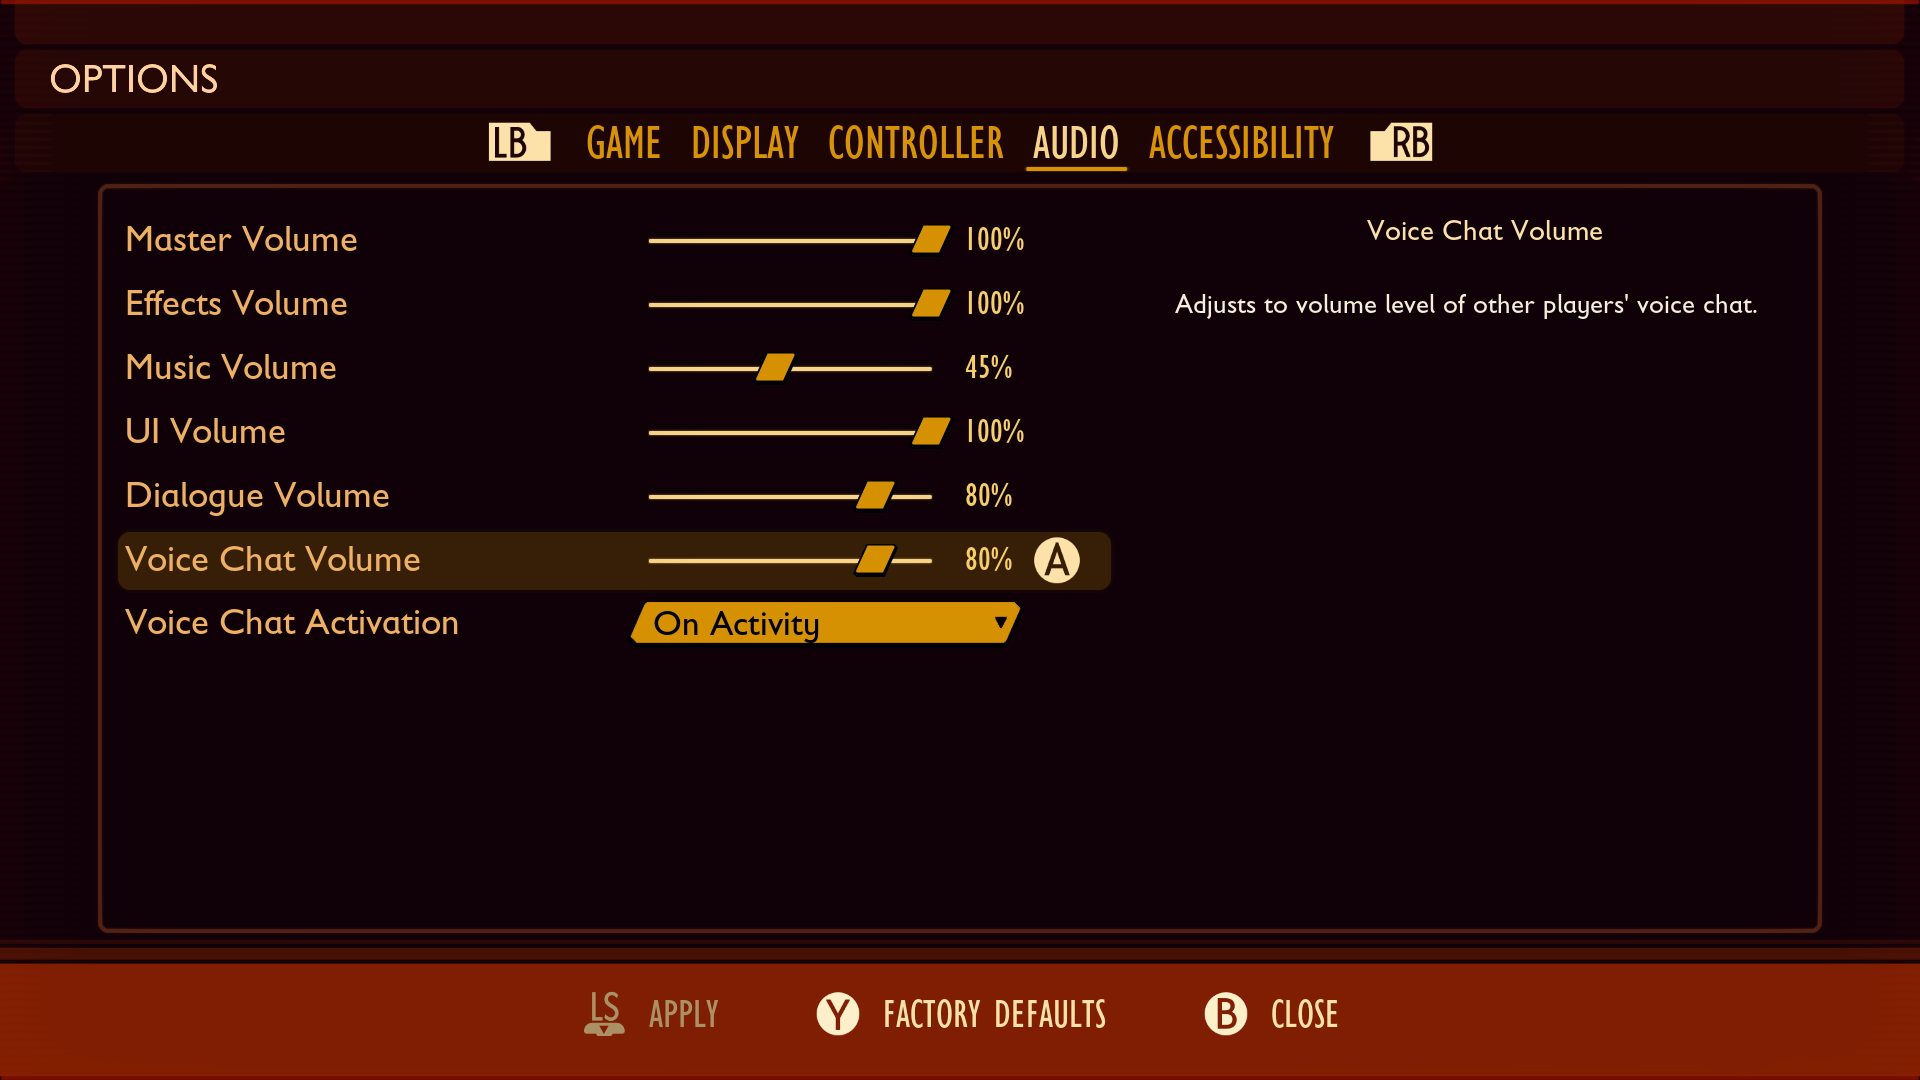 The audio options menu in Grounded. The player is given sliders to control the master, effects, music, UI, dialogue, and voice chat volume. 